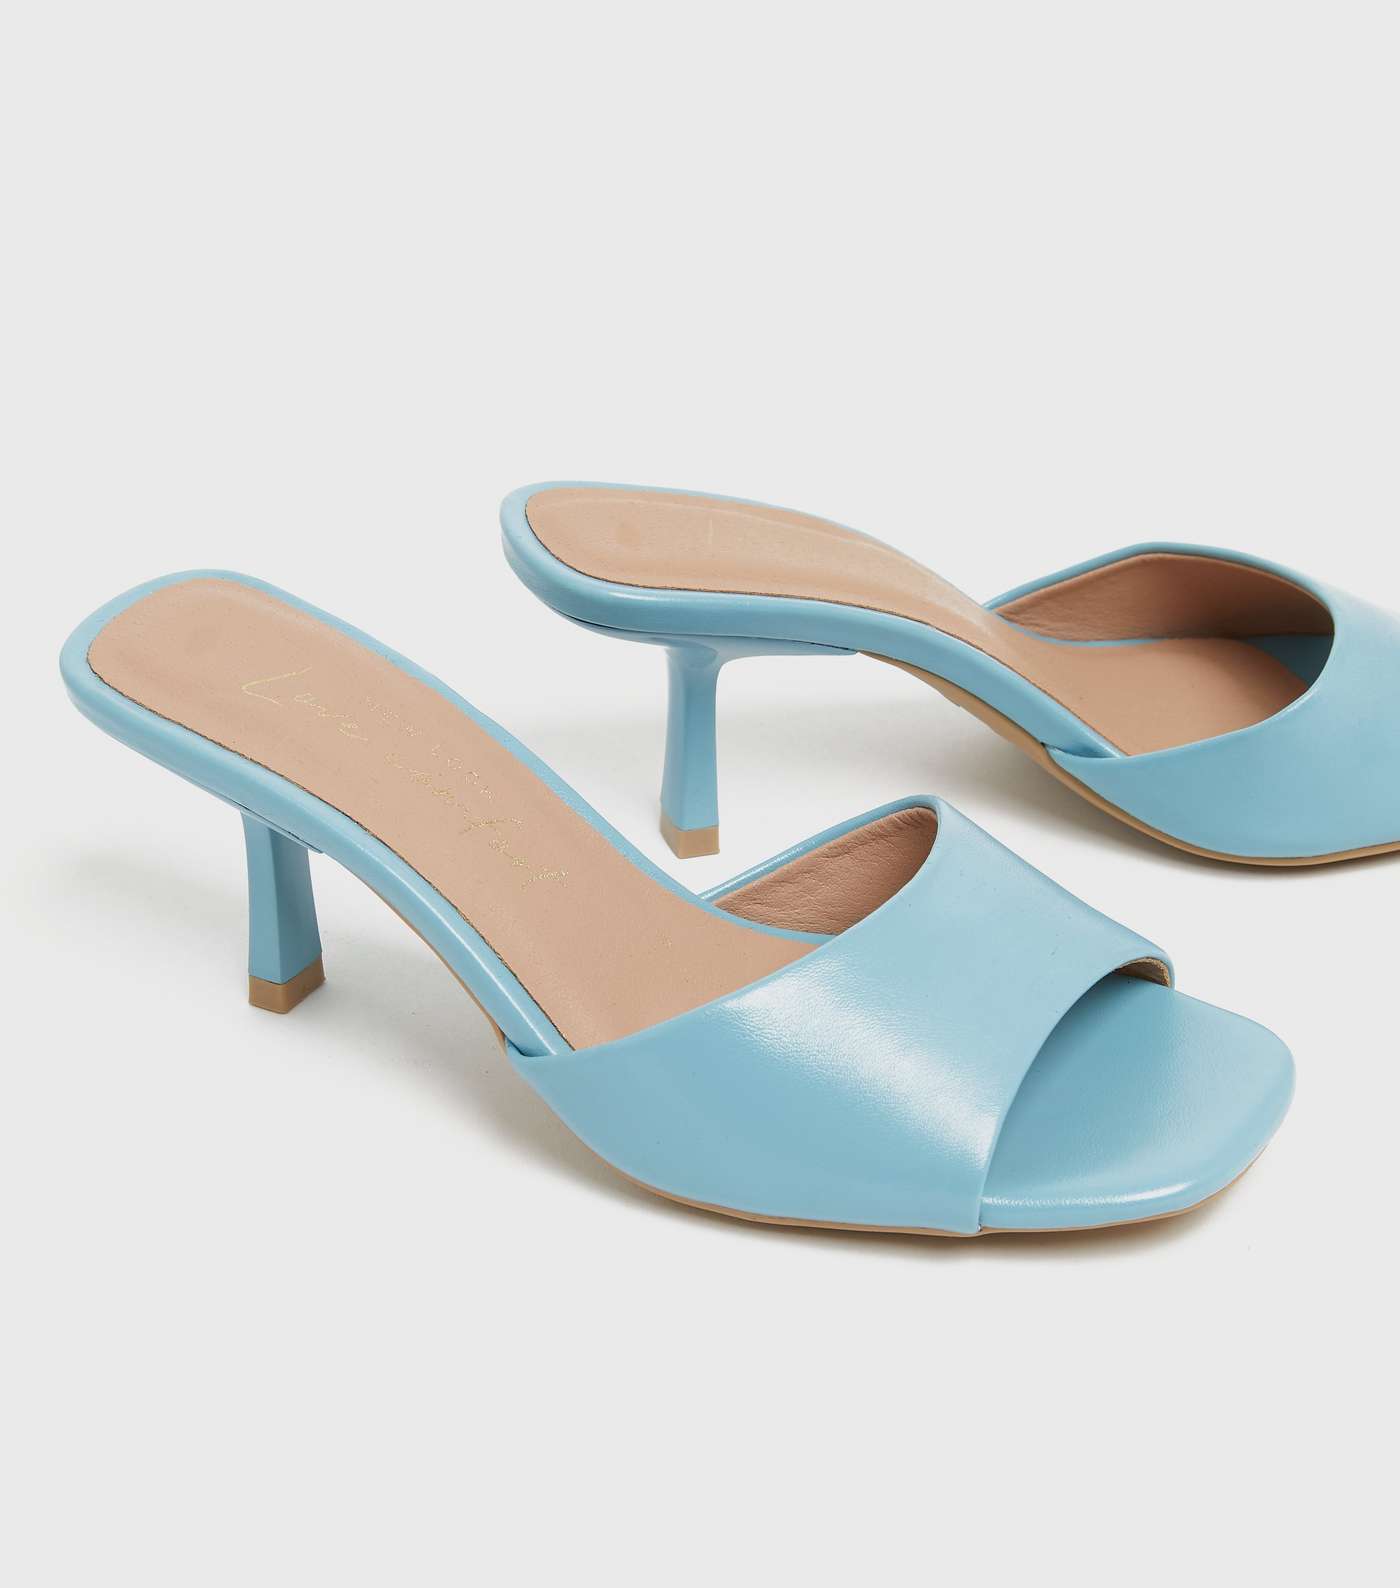 Pale Blue Leather-Look Square Toe Kitten Heel Mules Image 3